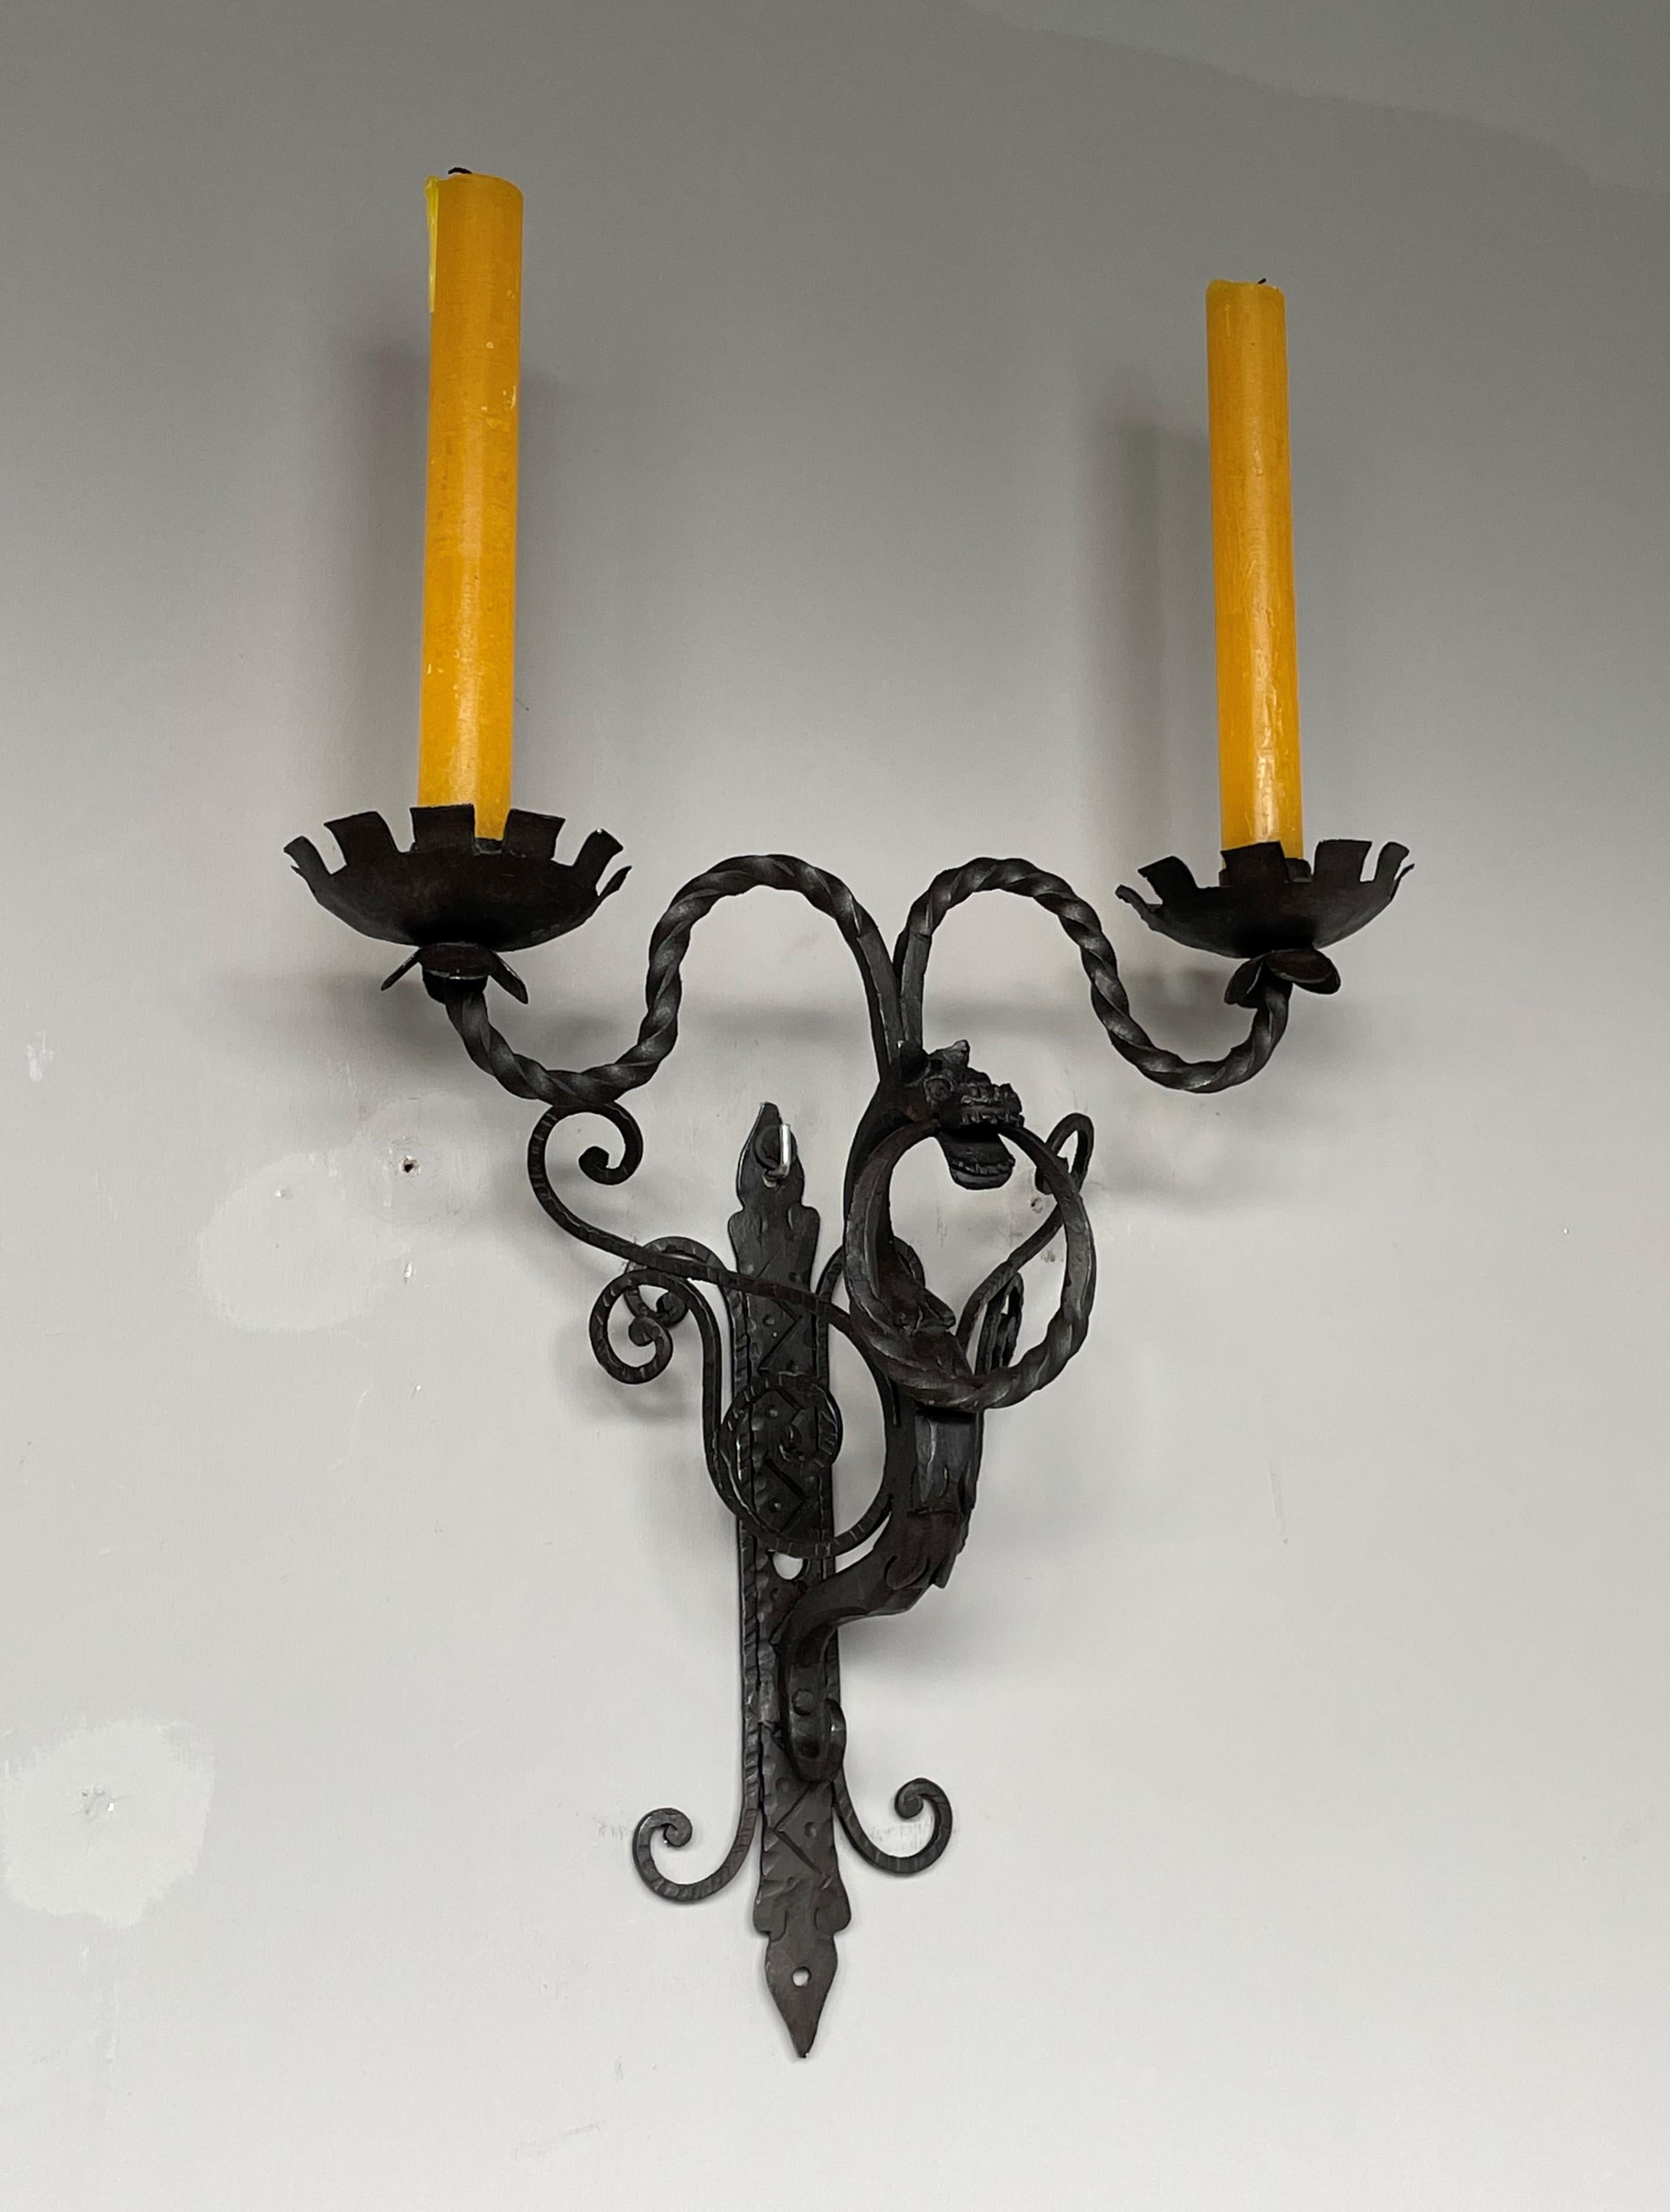 Rare Set of 7 Antique Wrought Iron Gothic Revival Dragon Sculpture Wall Sconces In Excellent Condition For Sale In Lisse, NL